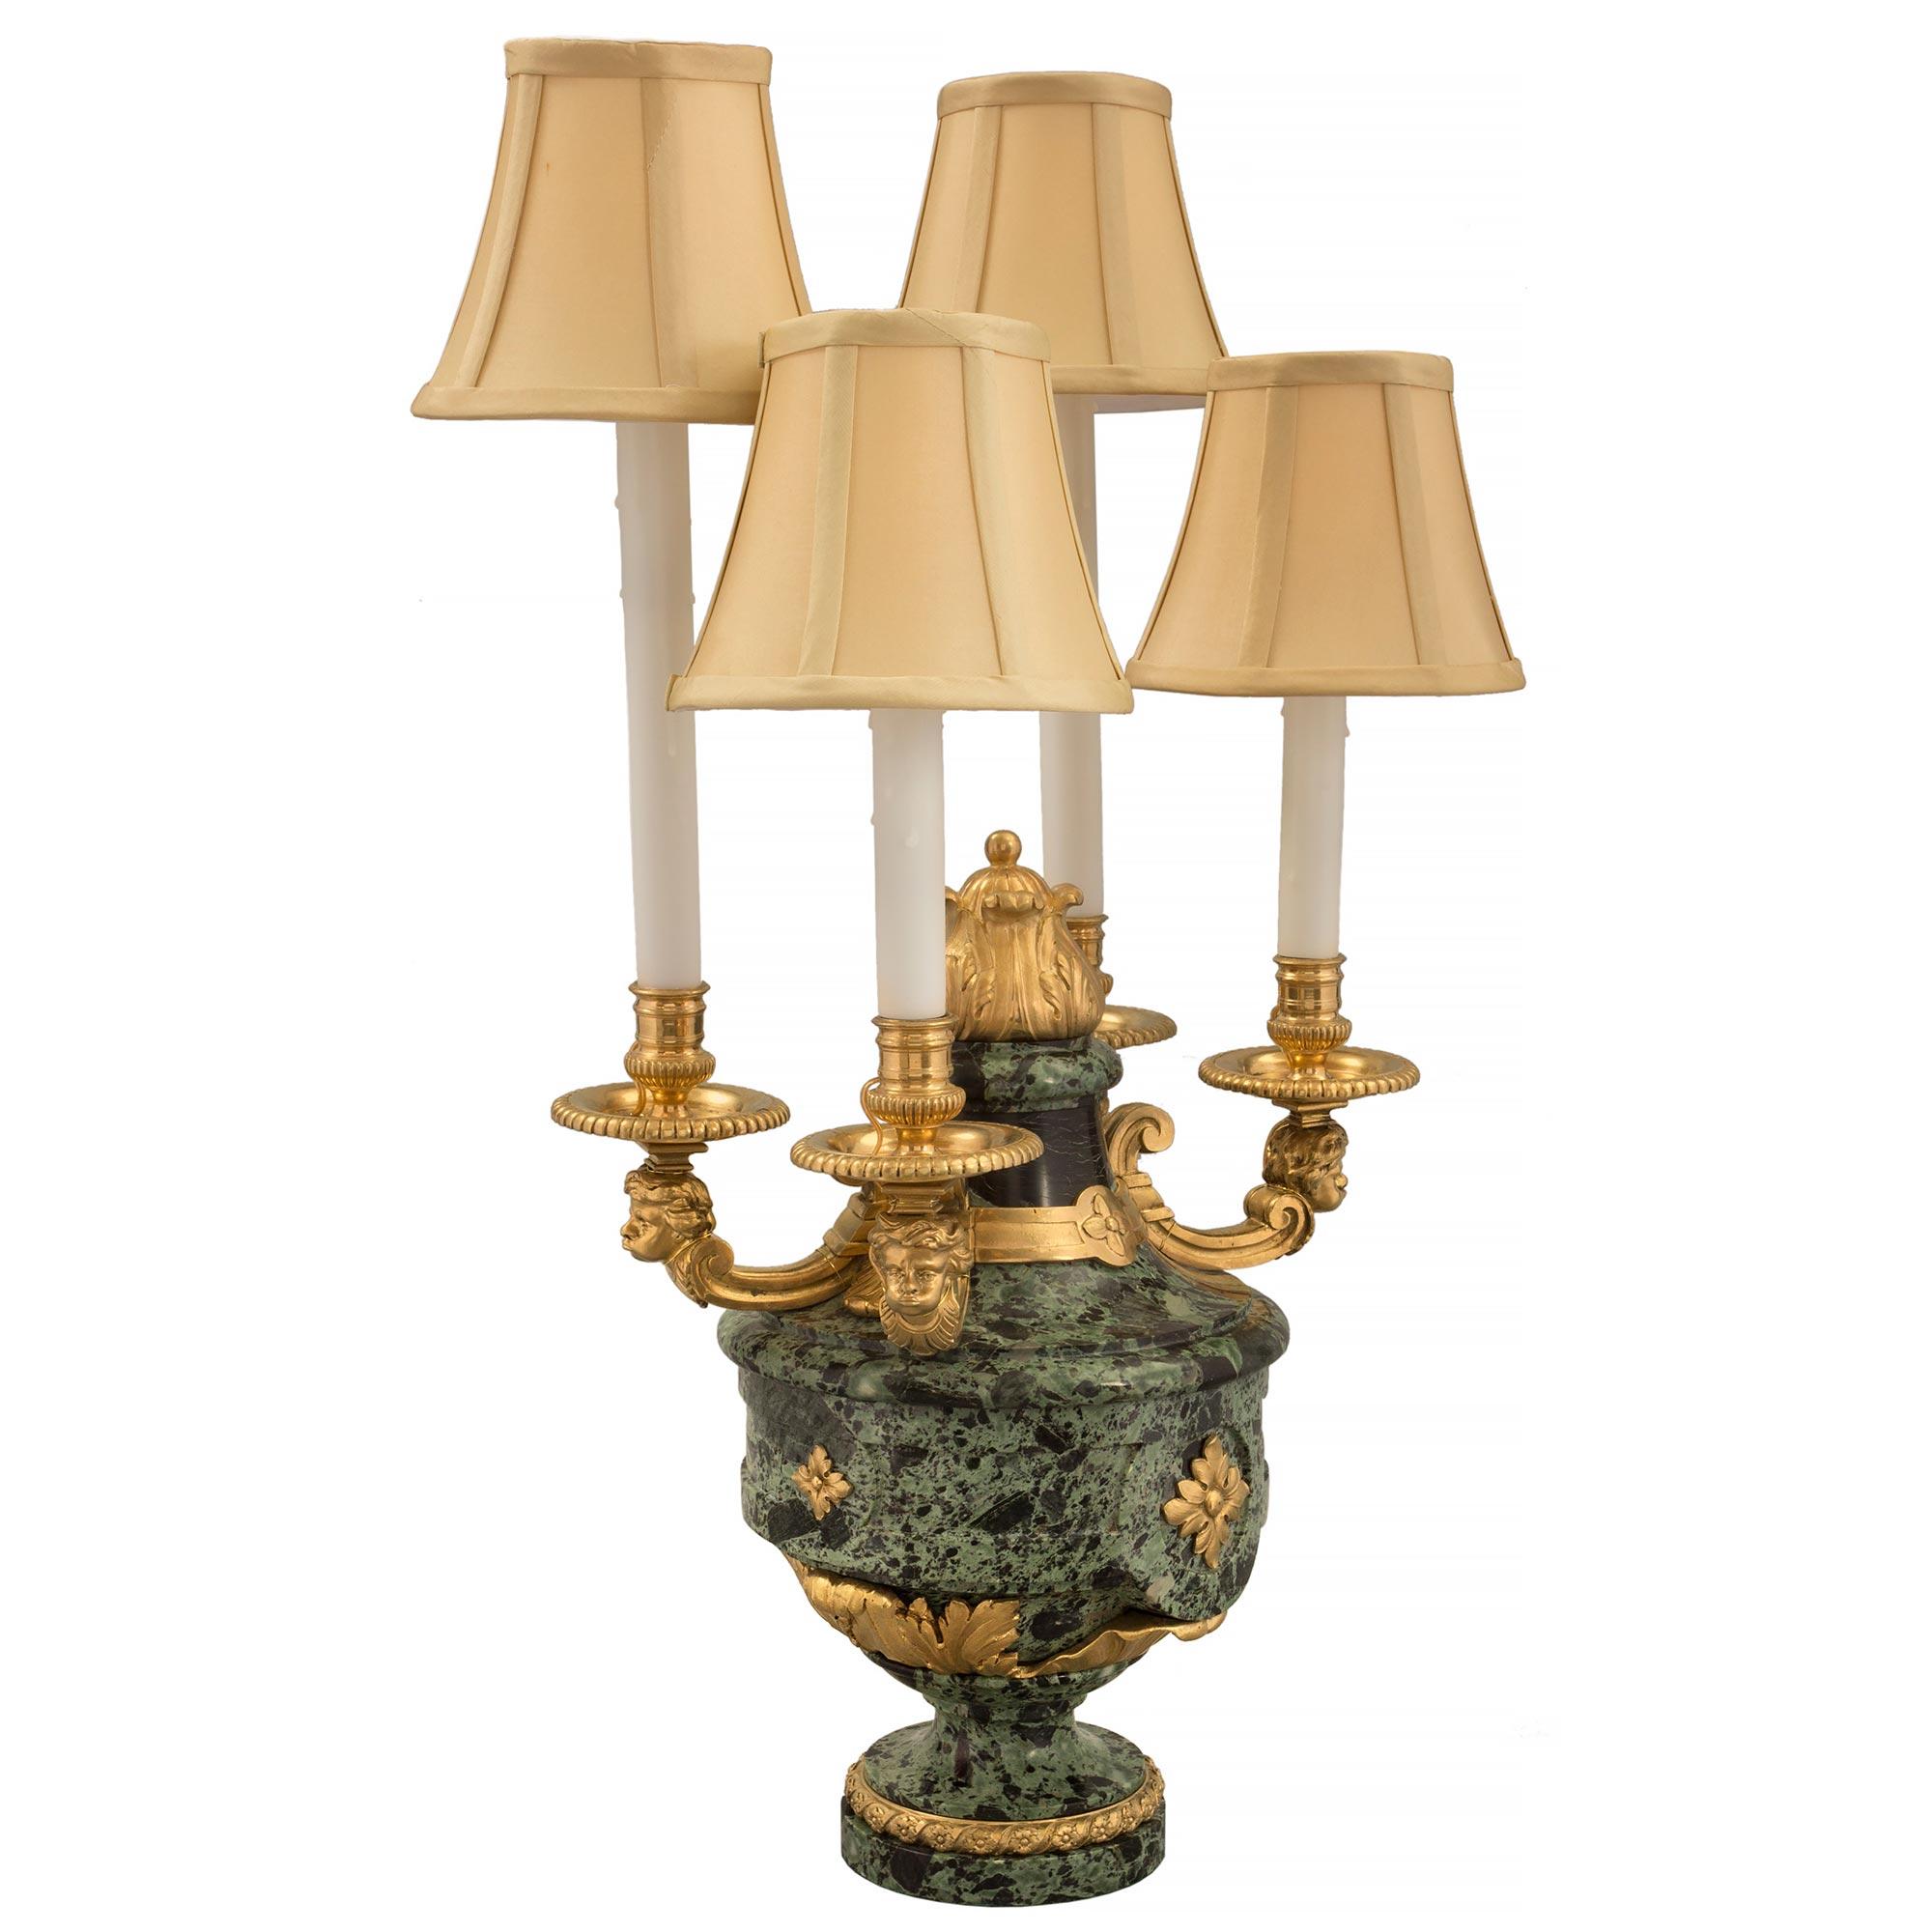 A sensational and high quality pair of French 19th century Louis XVI st. Belle Époque period Vert Antique marble and ormolu four arm candelabra lamps, attributed to Henry Dasson. Each lamp is raised by a circular base with an elegant wrap around